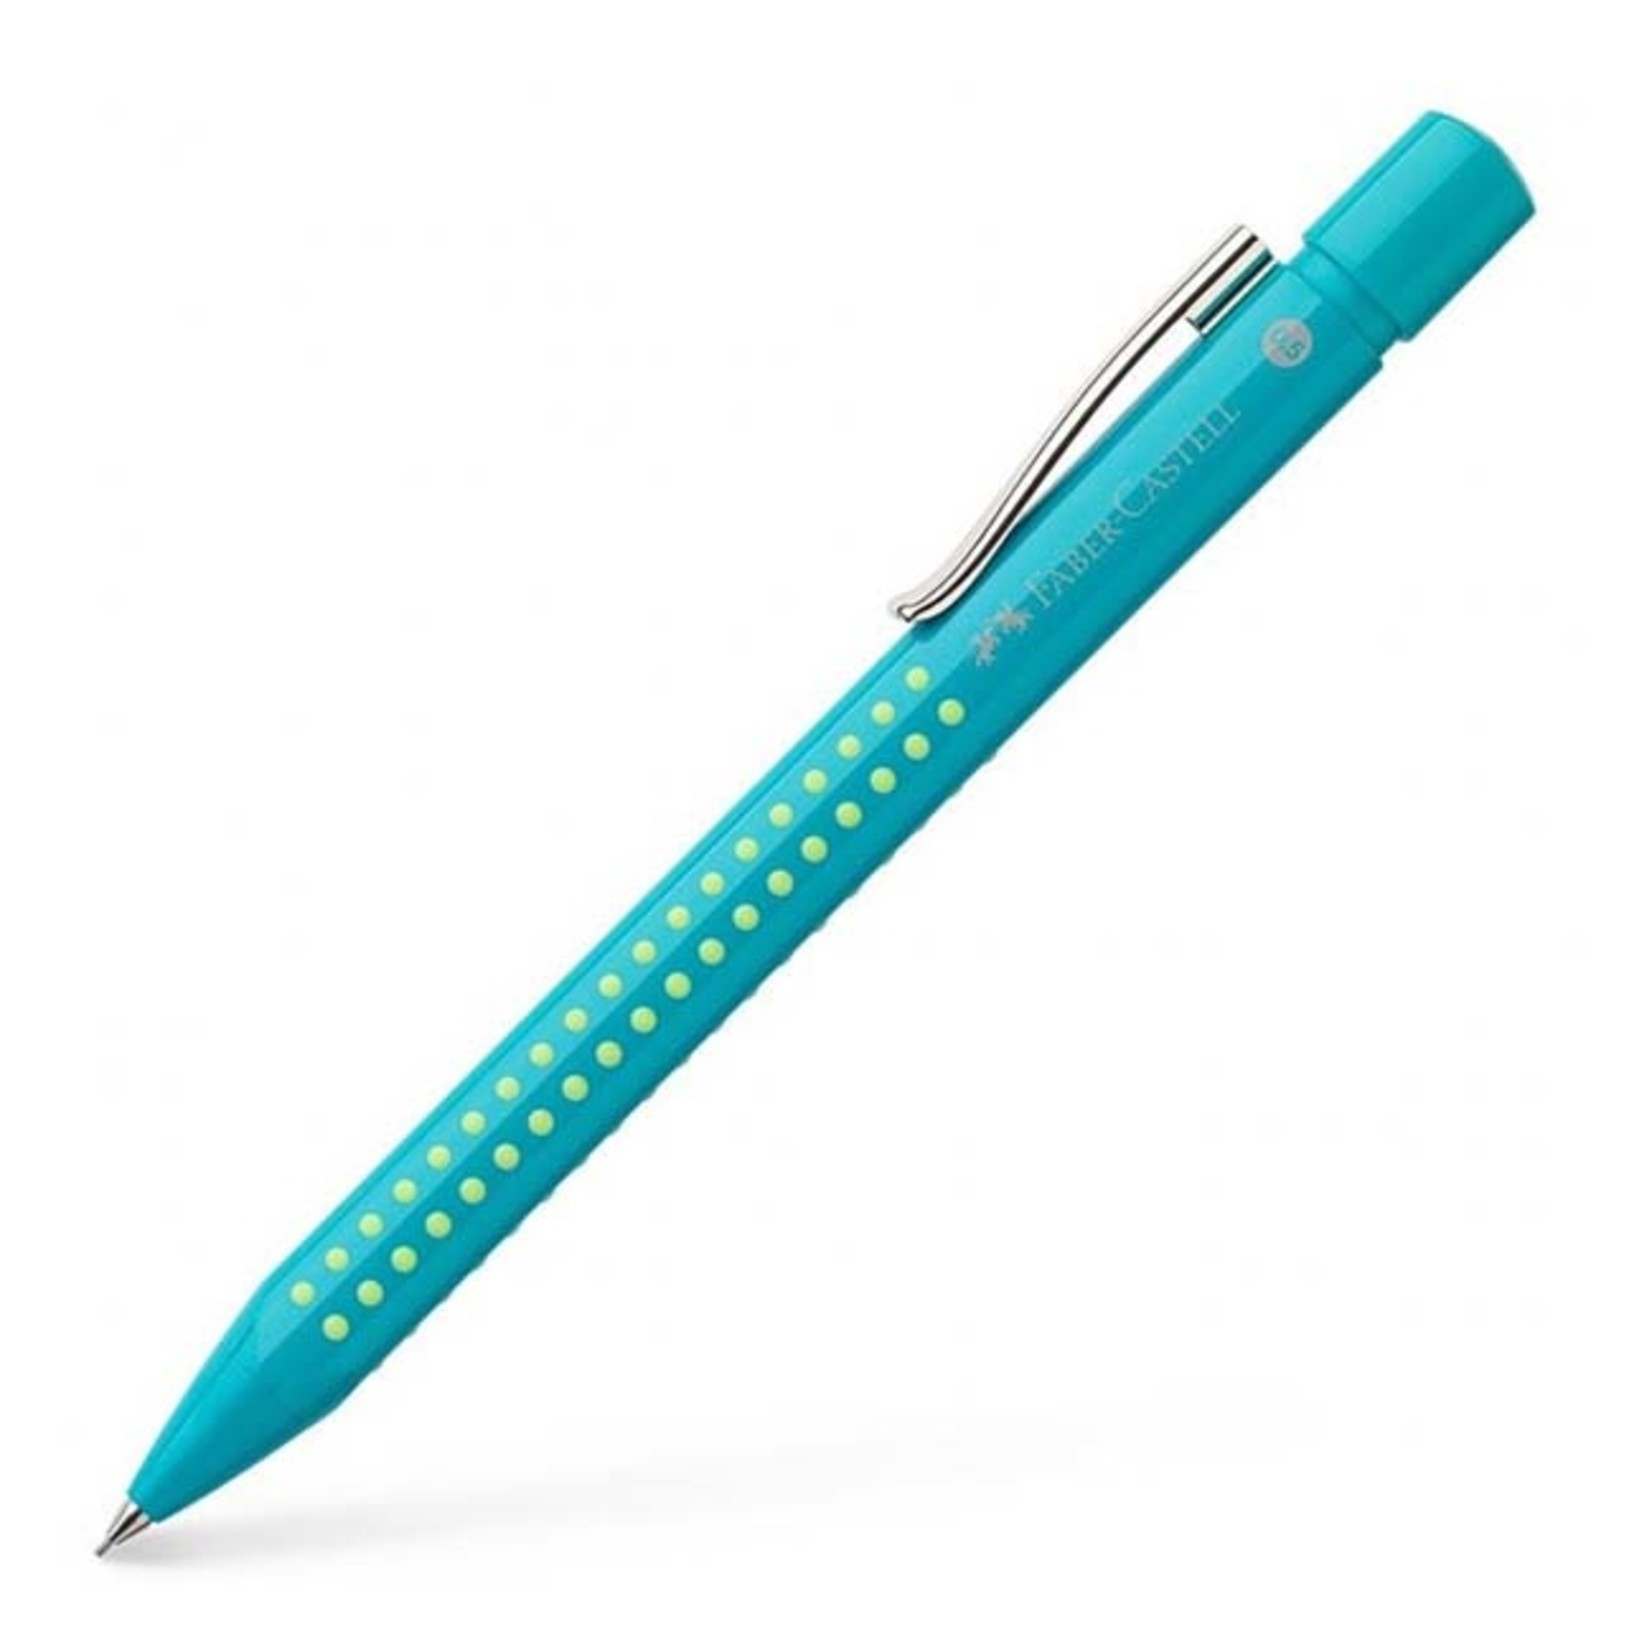 FABER CASTELL GRIP 2010 HARMONY MECHANICAL PENCIL 0.5MM TURQUOISE